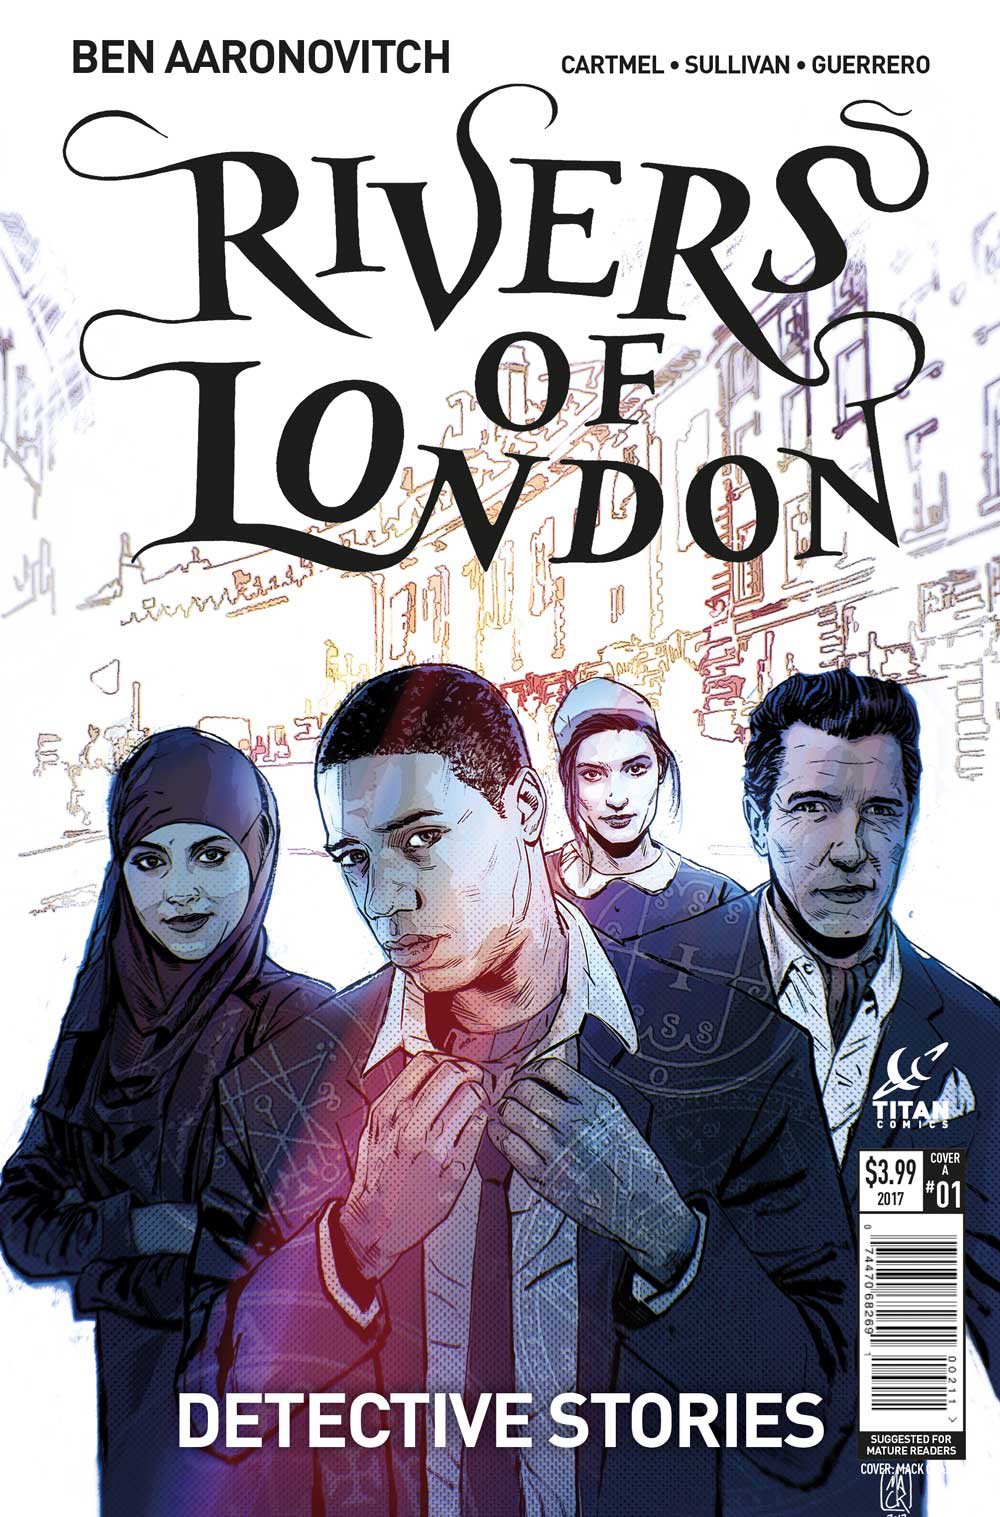 RIVERS OF LONDON DETECTIVE STORIES #1 (OF 4) CVR A CHATER